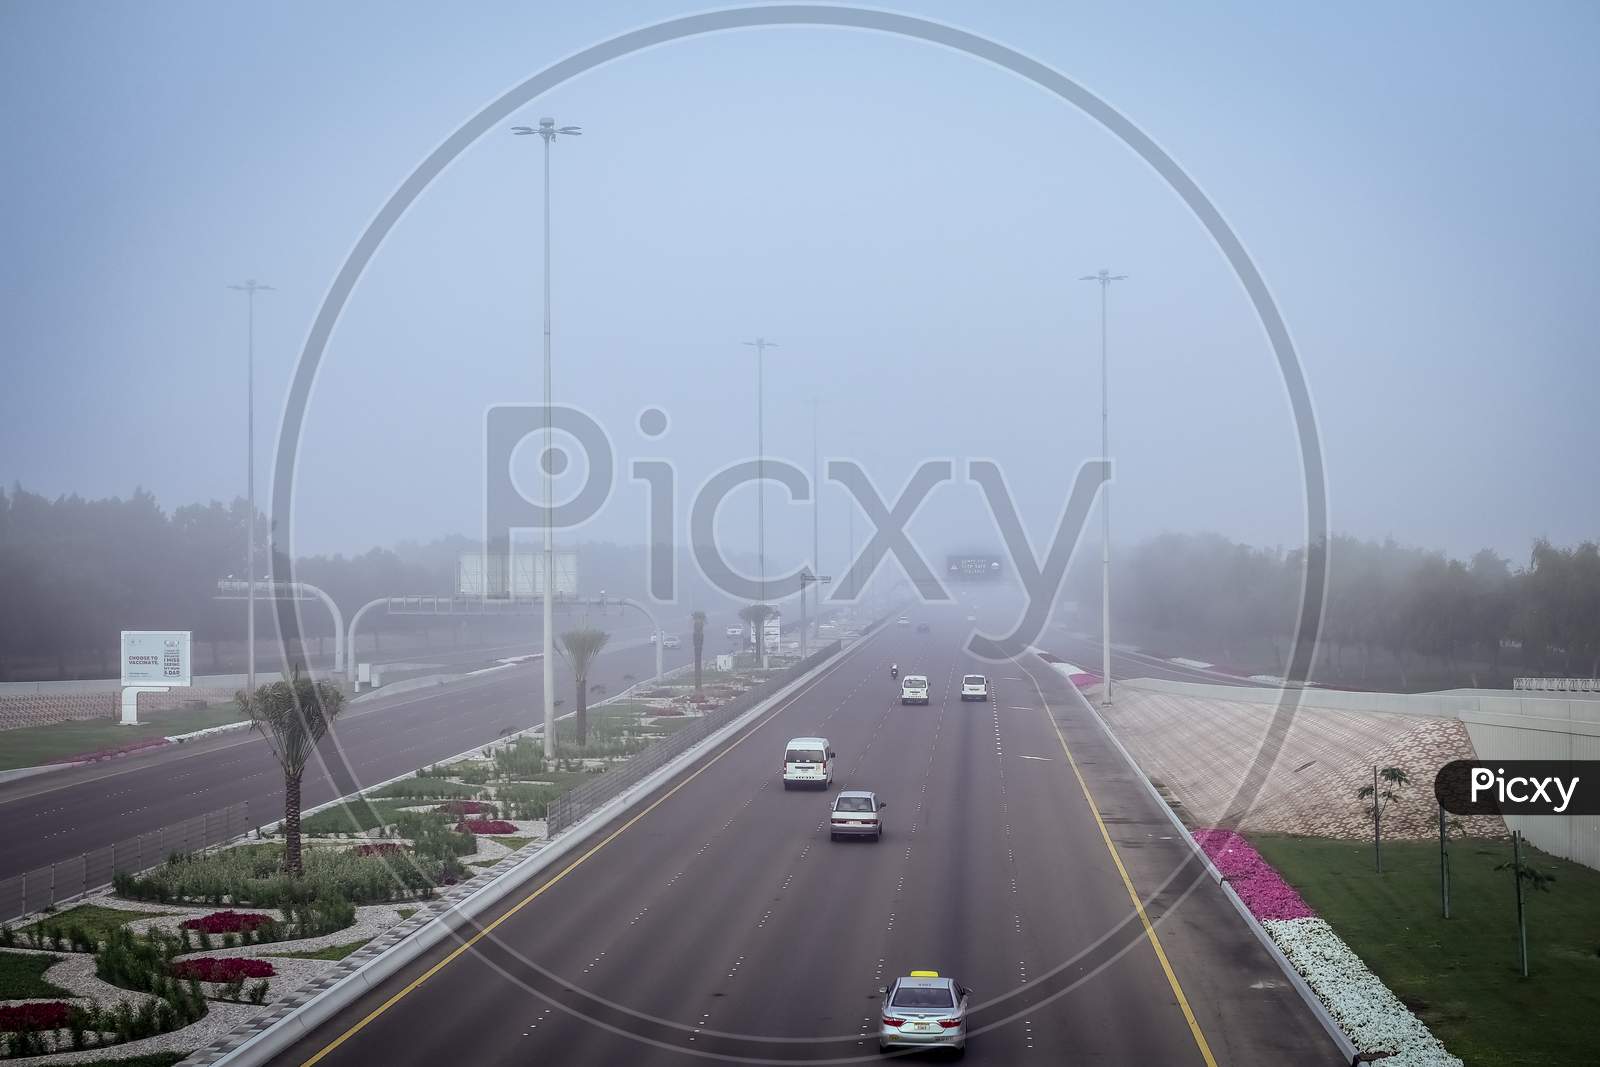 Road In The Fog, Sign Mention Keep Distance For Motorists At Dubai Road, Foggy Weather In Uae, Dense Fog Keep Safe Distance Banner In Arabic And English